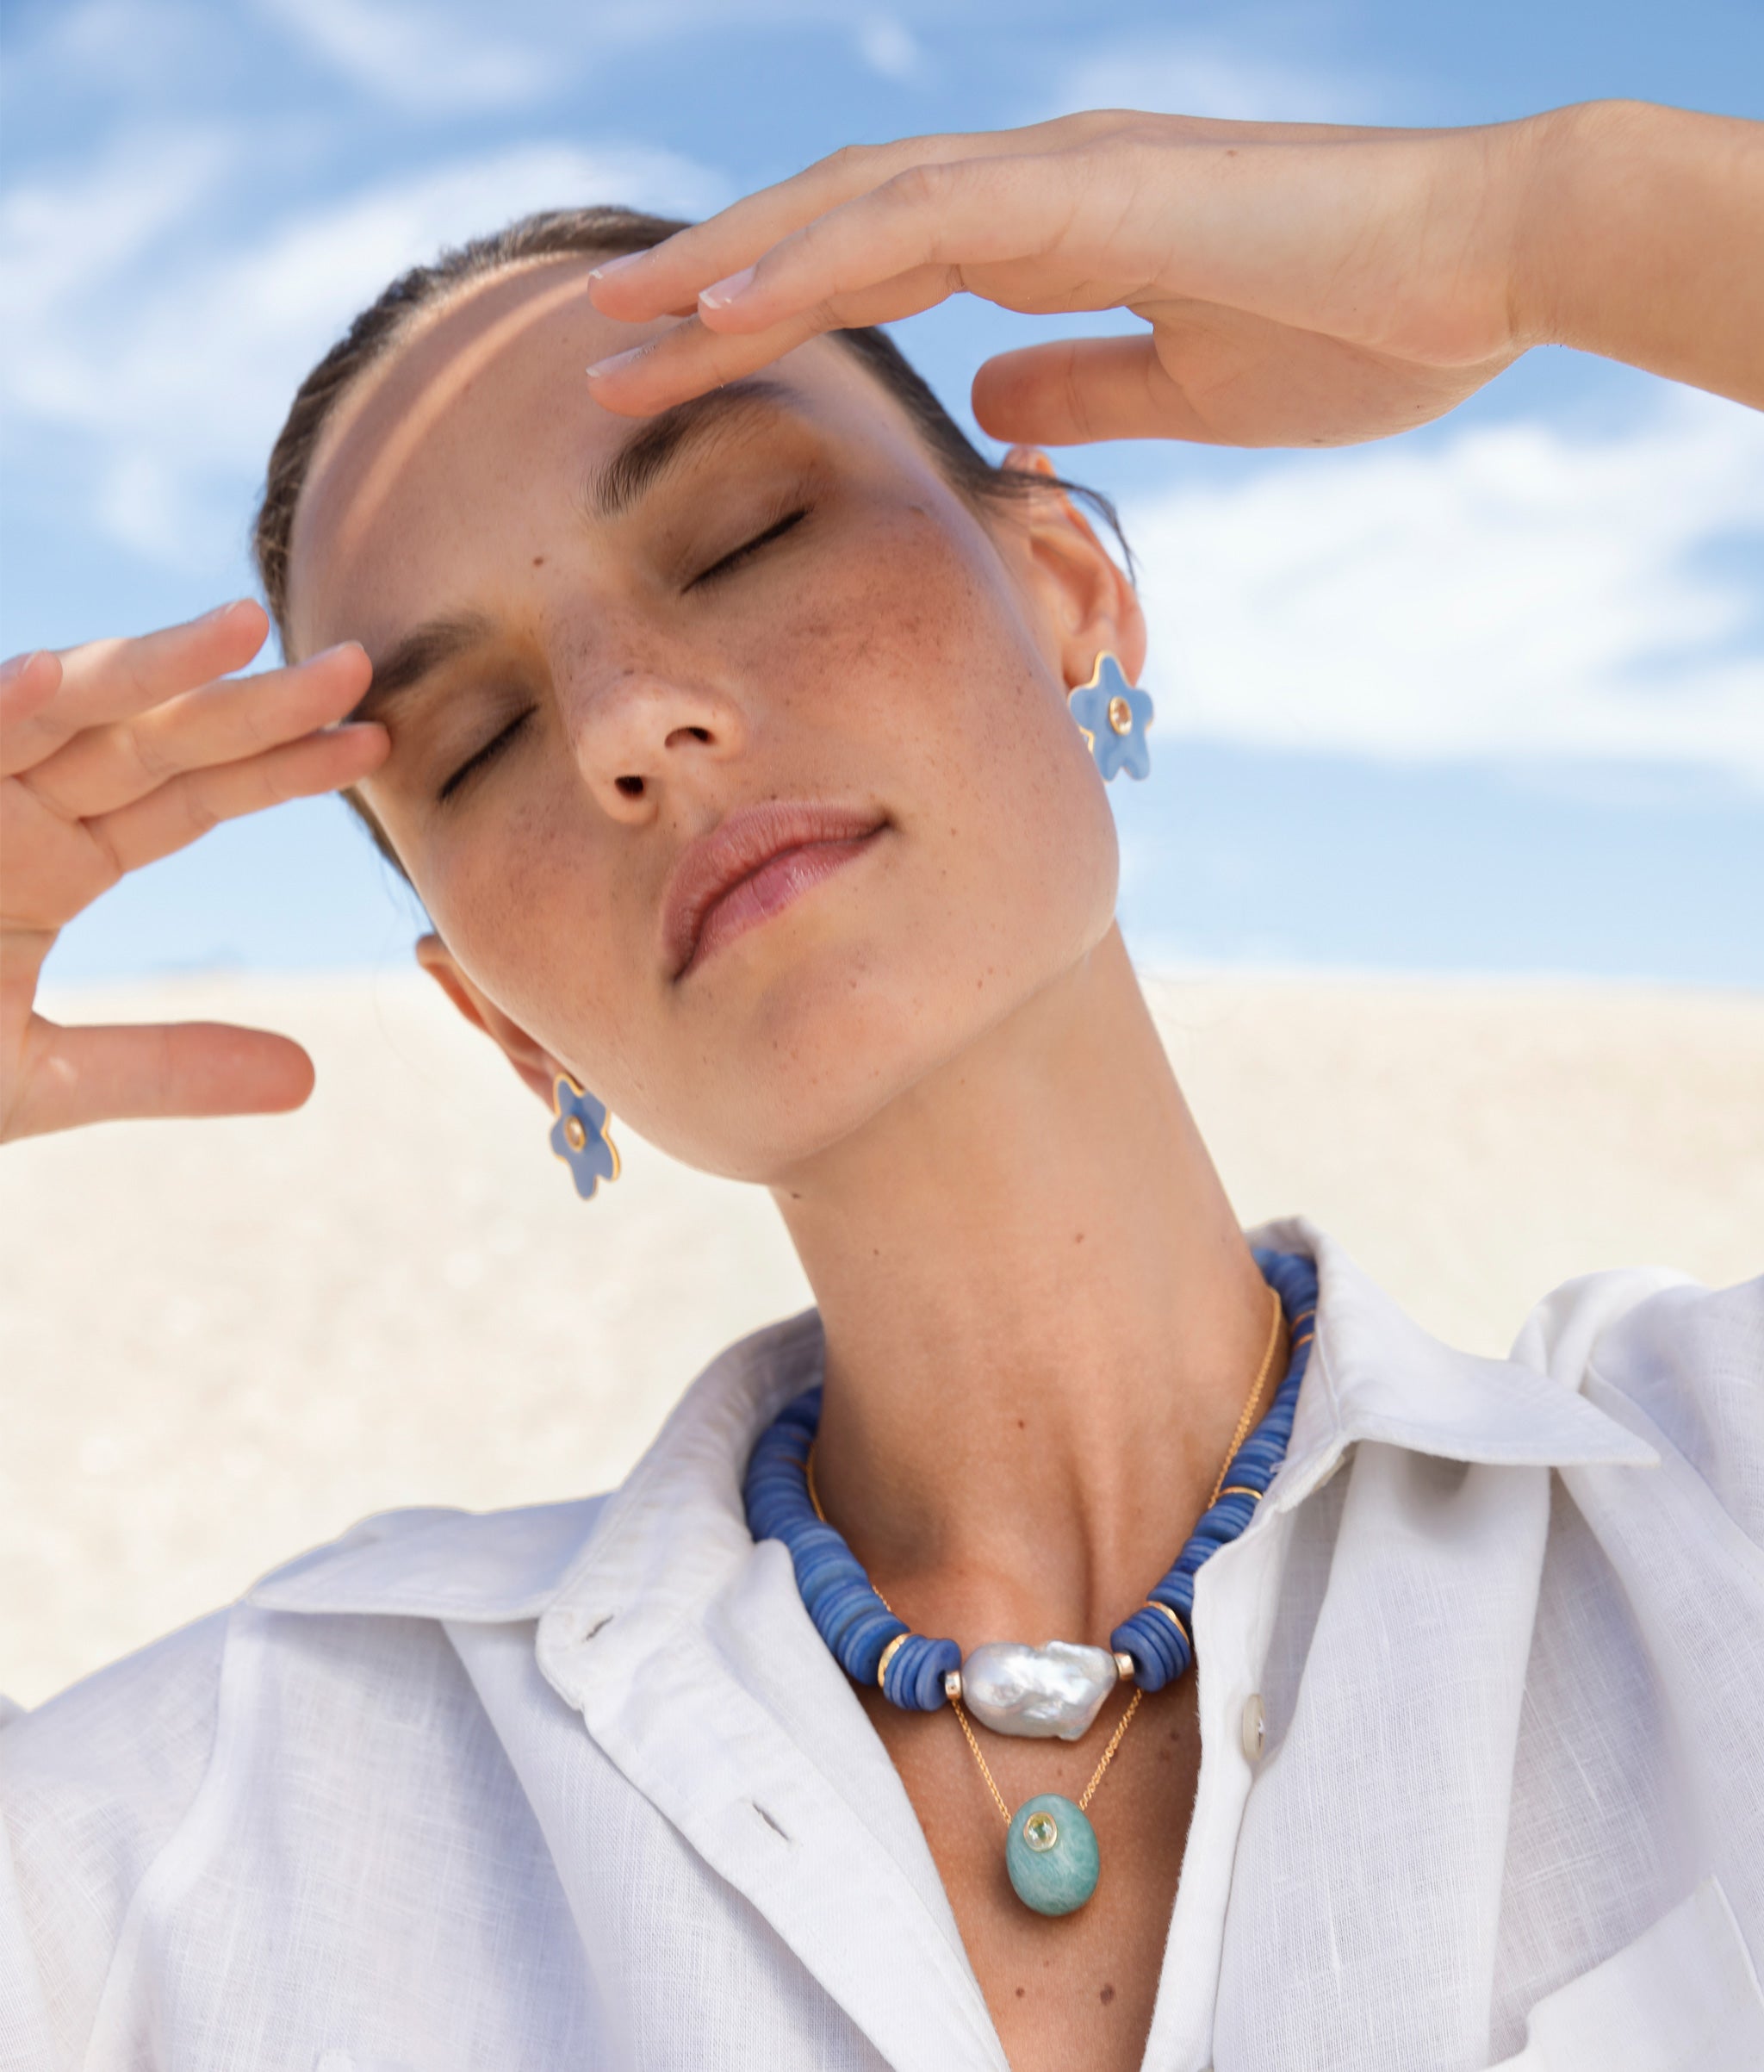 Model at the beach wearing Bilbao Collar in Marine paired with gold-chain necklace with blue stone and blue earrings.